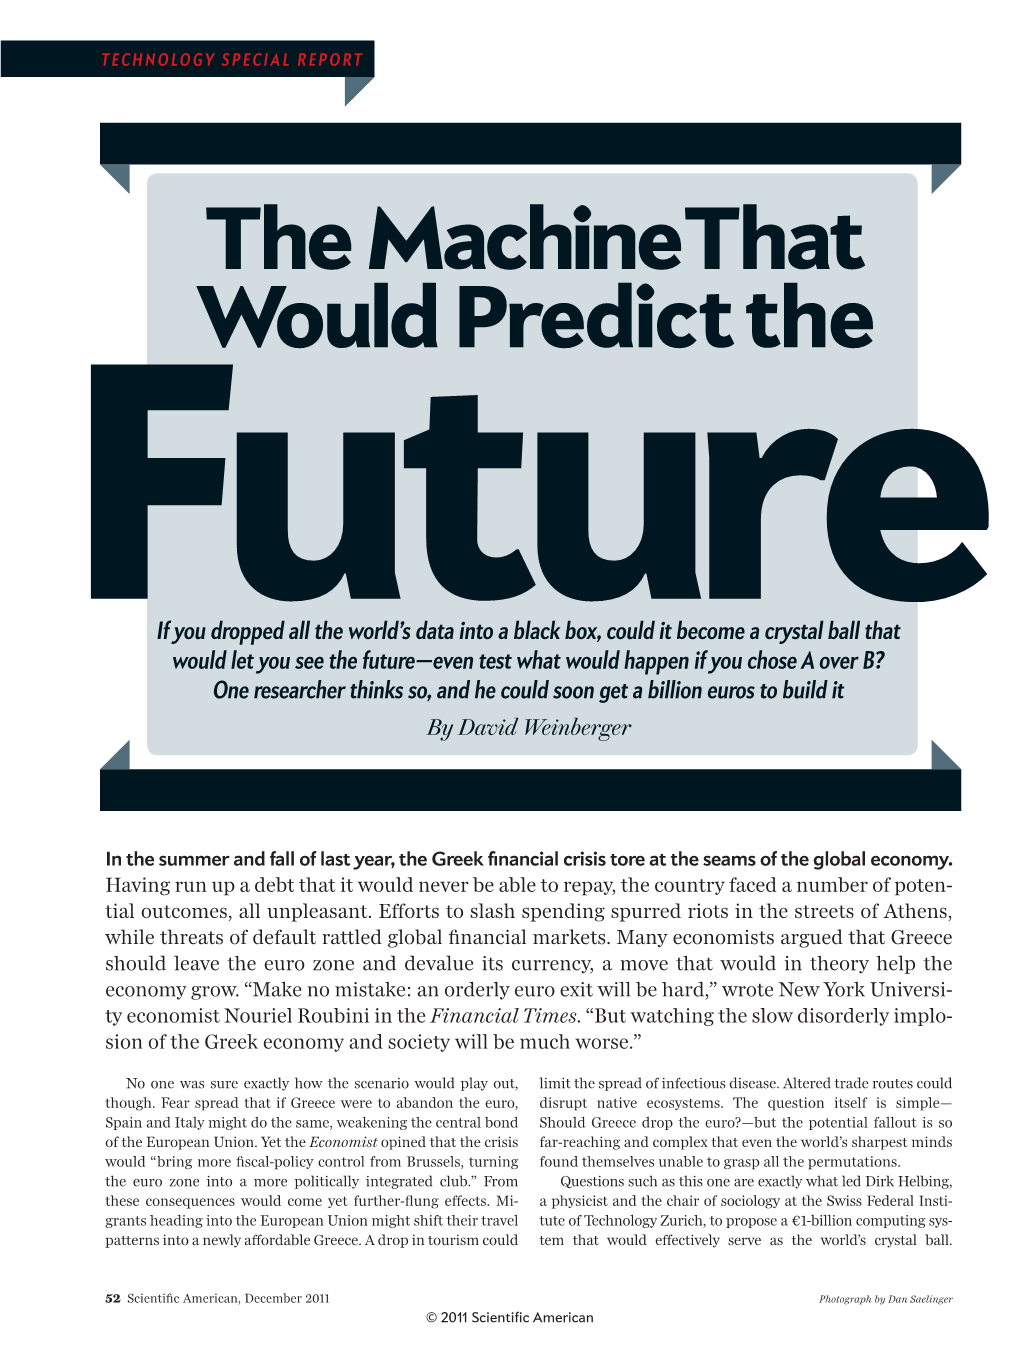 The Machine That Would Predict the Future